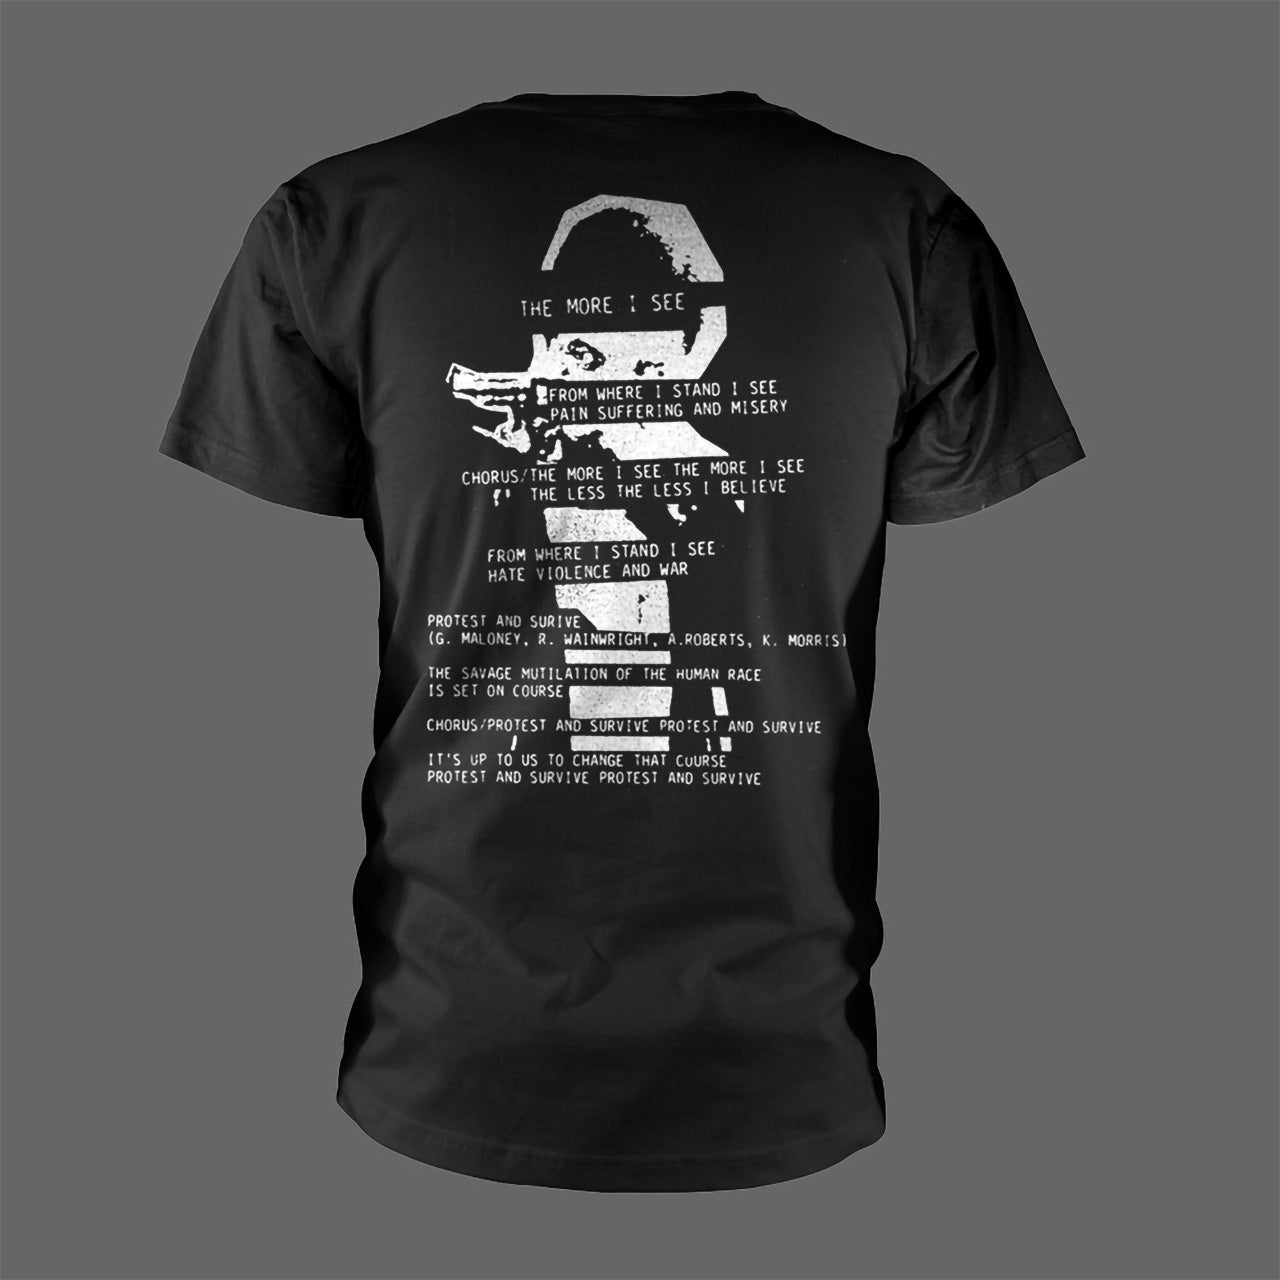 Discharge - The More I See (T-Shirt)